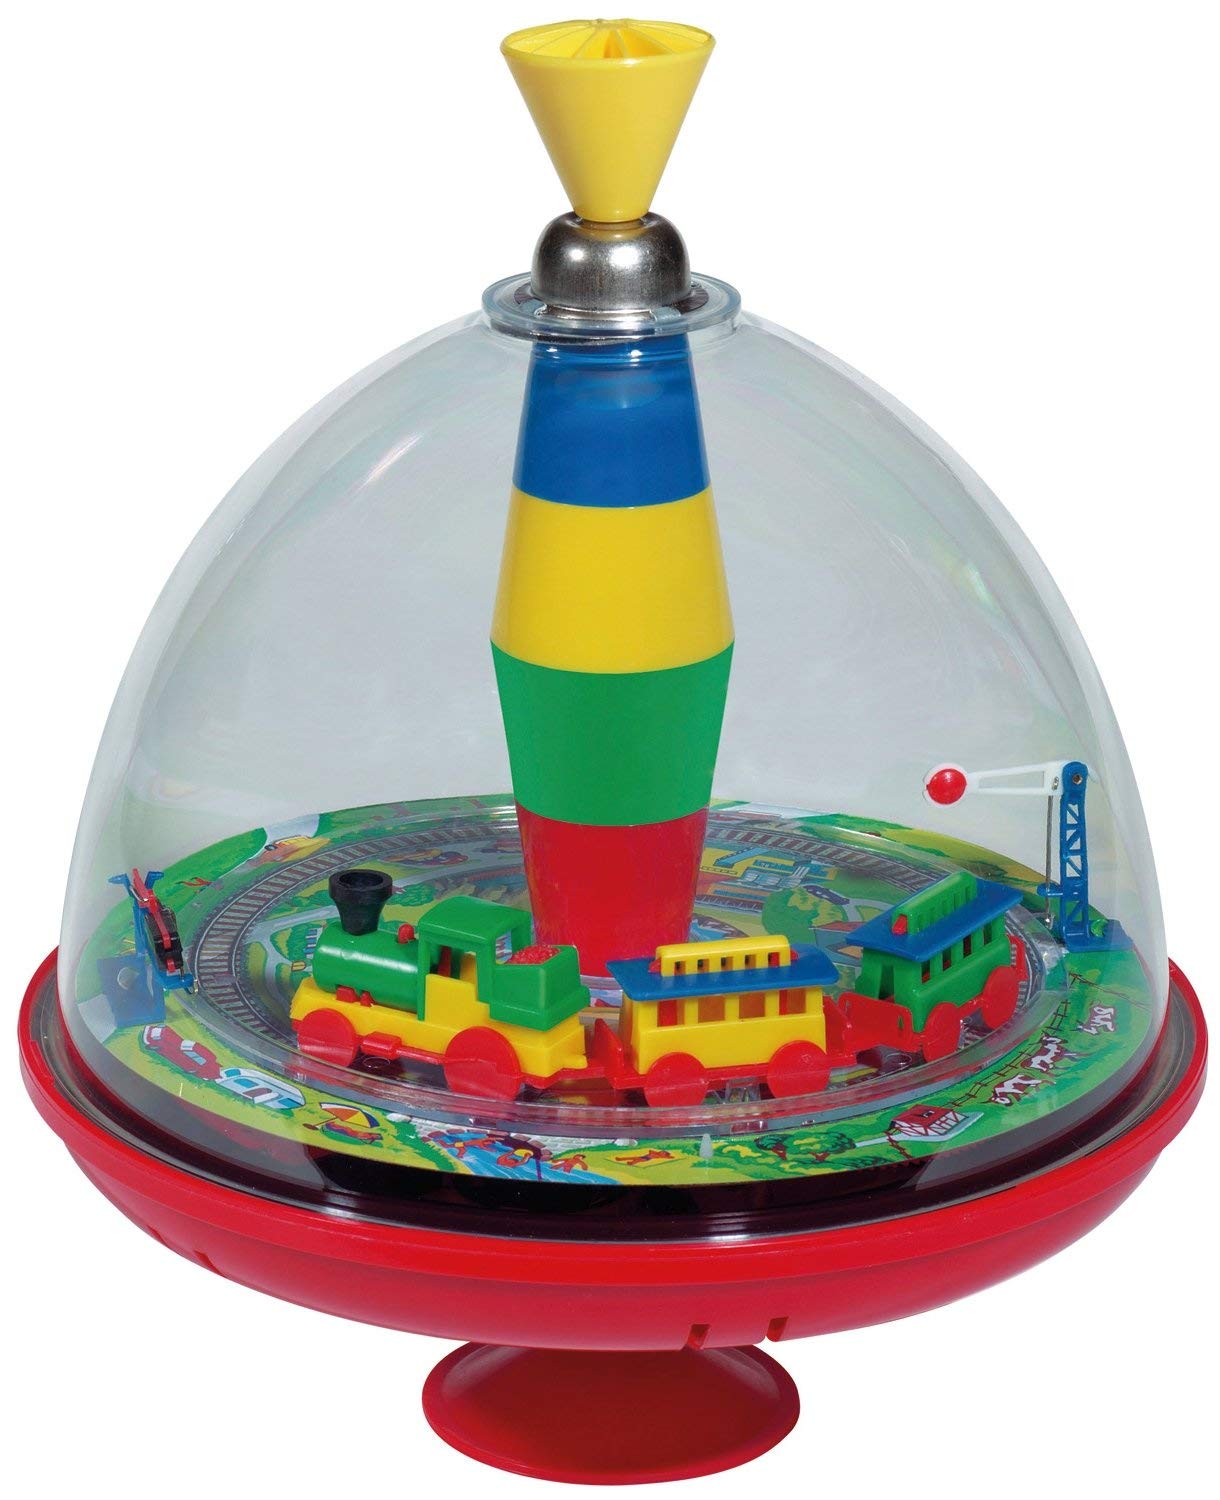 simm spielwaren Bolz Panorama Spinning Top Railways With Sound Chip Noise Panorama Top Trai